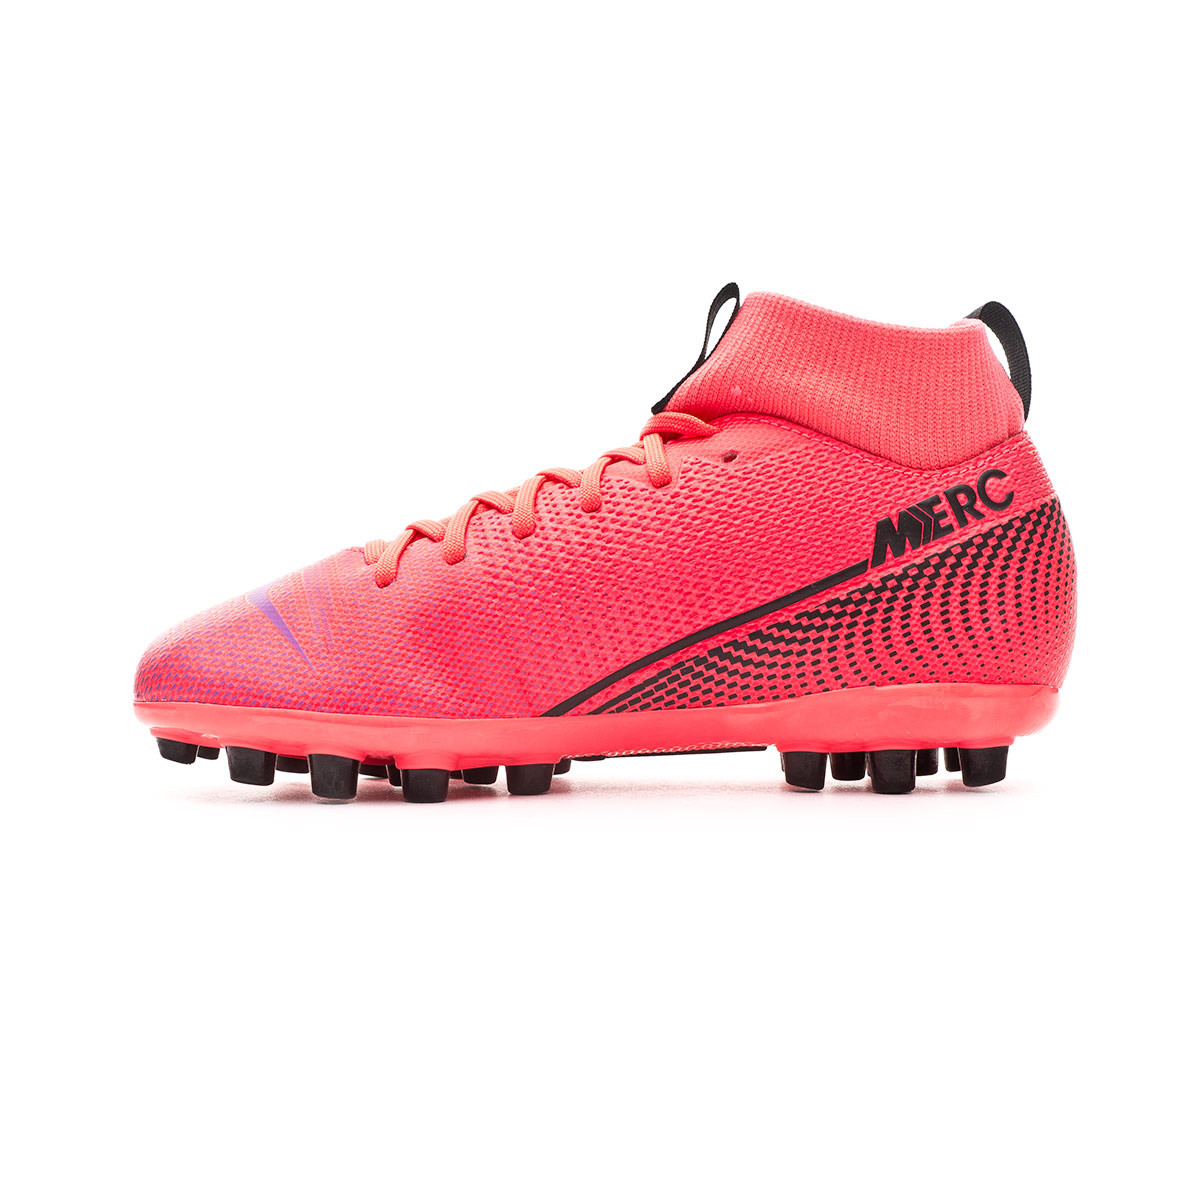 mercurial superfly size 10